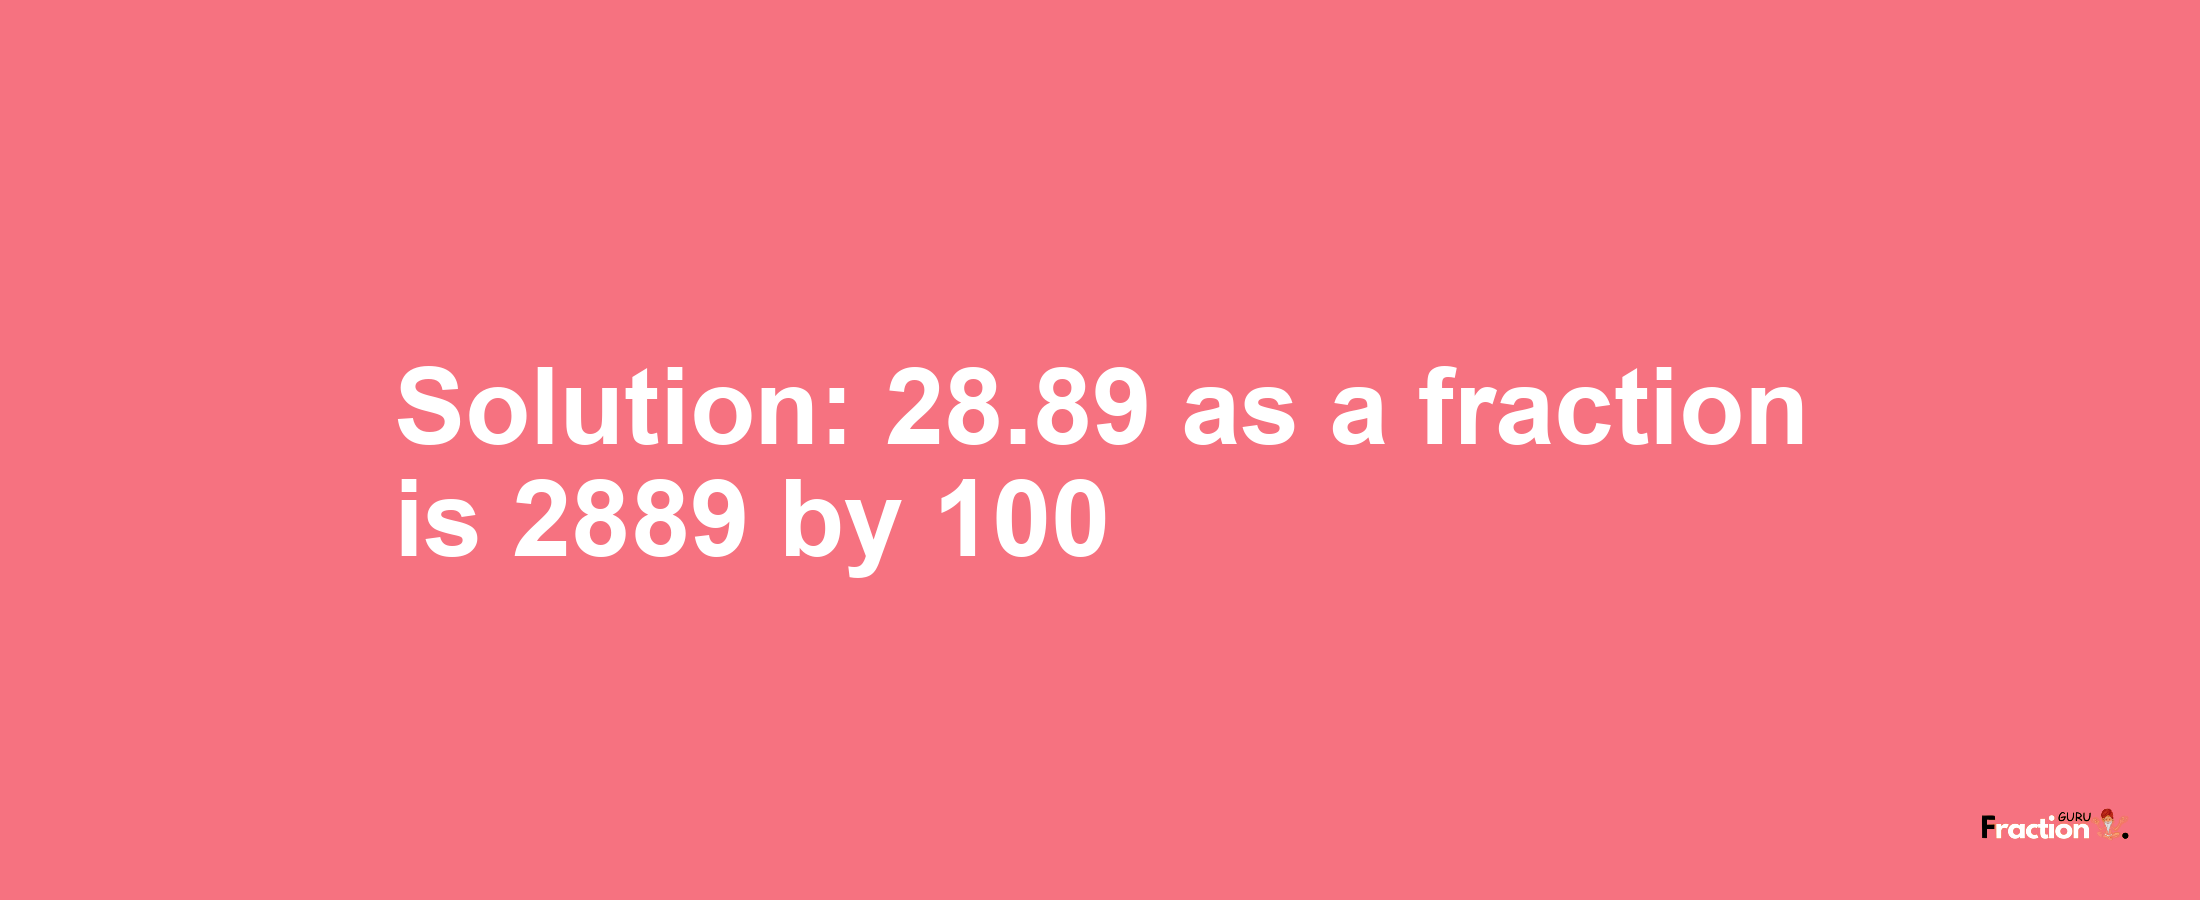 Solution:28.89 as a fraction is 2889/100